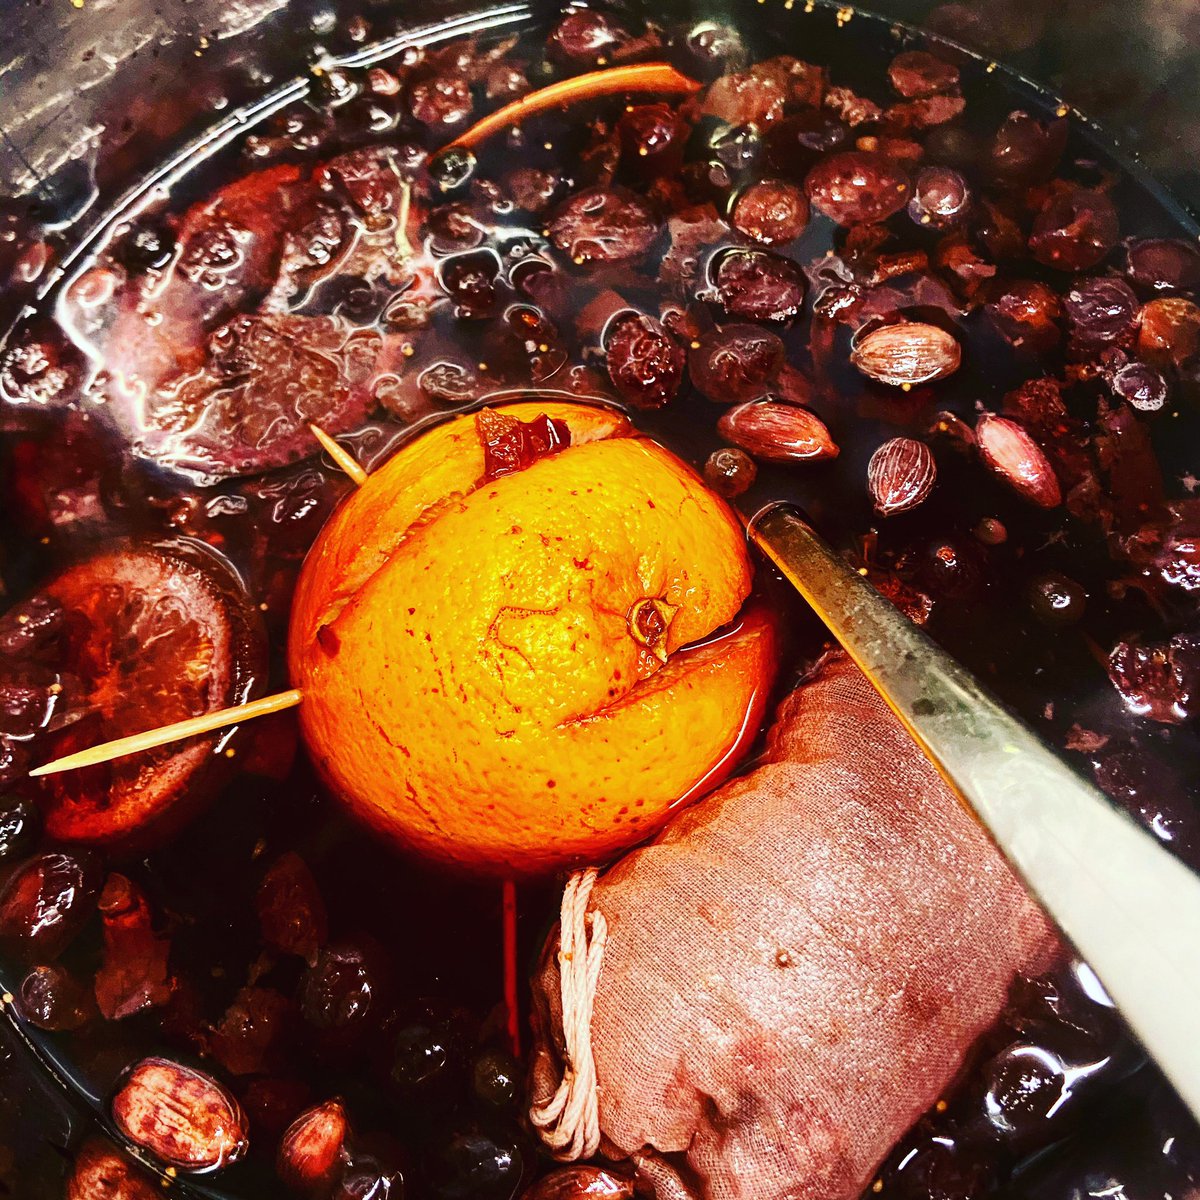 The mulled wine will remain on constant on for the foreseeable. Not only does it taste like Christmas but it has your gaf smelling damn fine too!